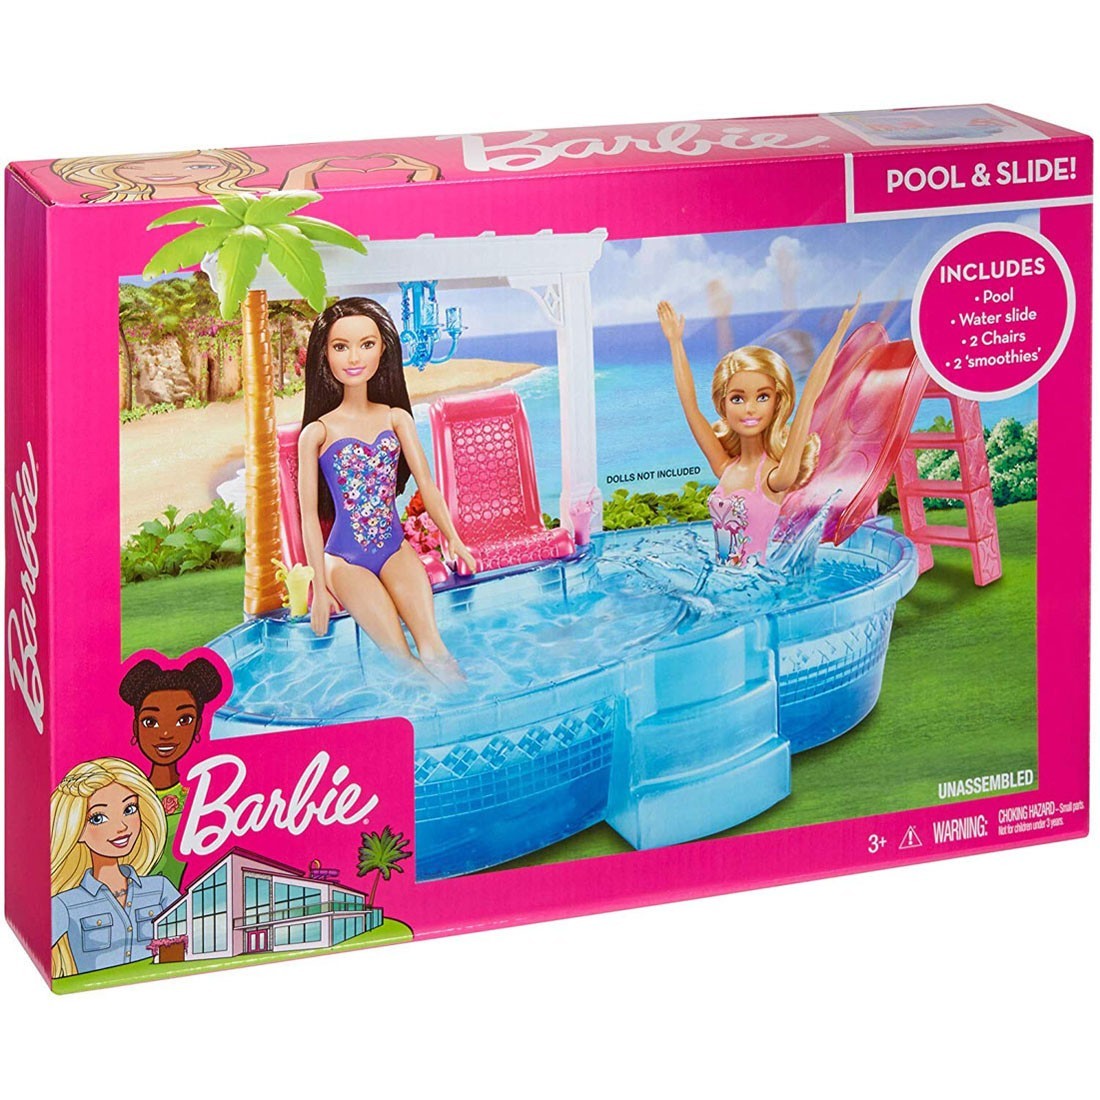 Buy Barbie Glam Pool - Barbie, delivered to your home | TheOutfit